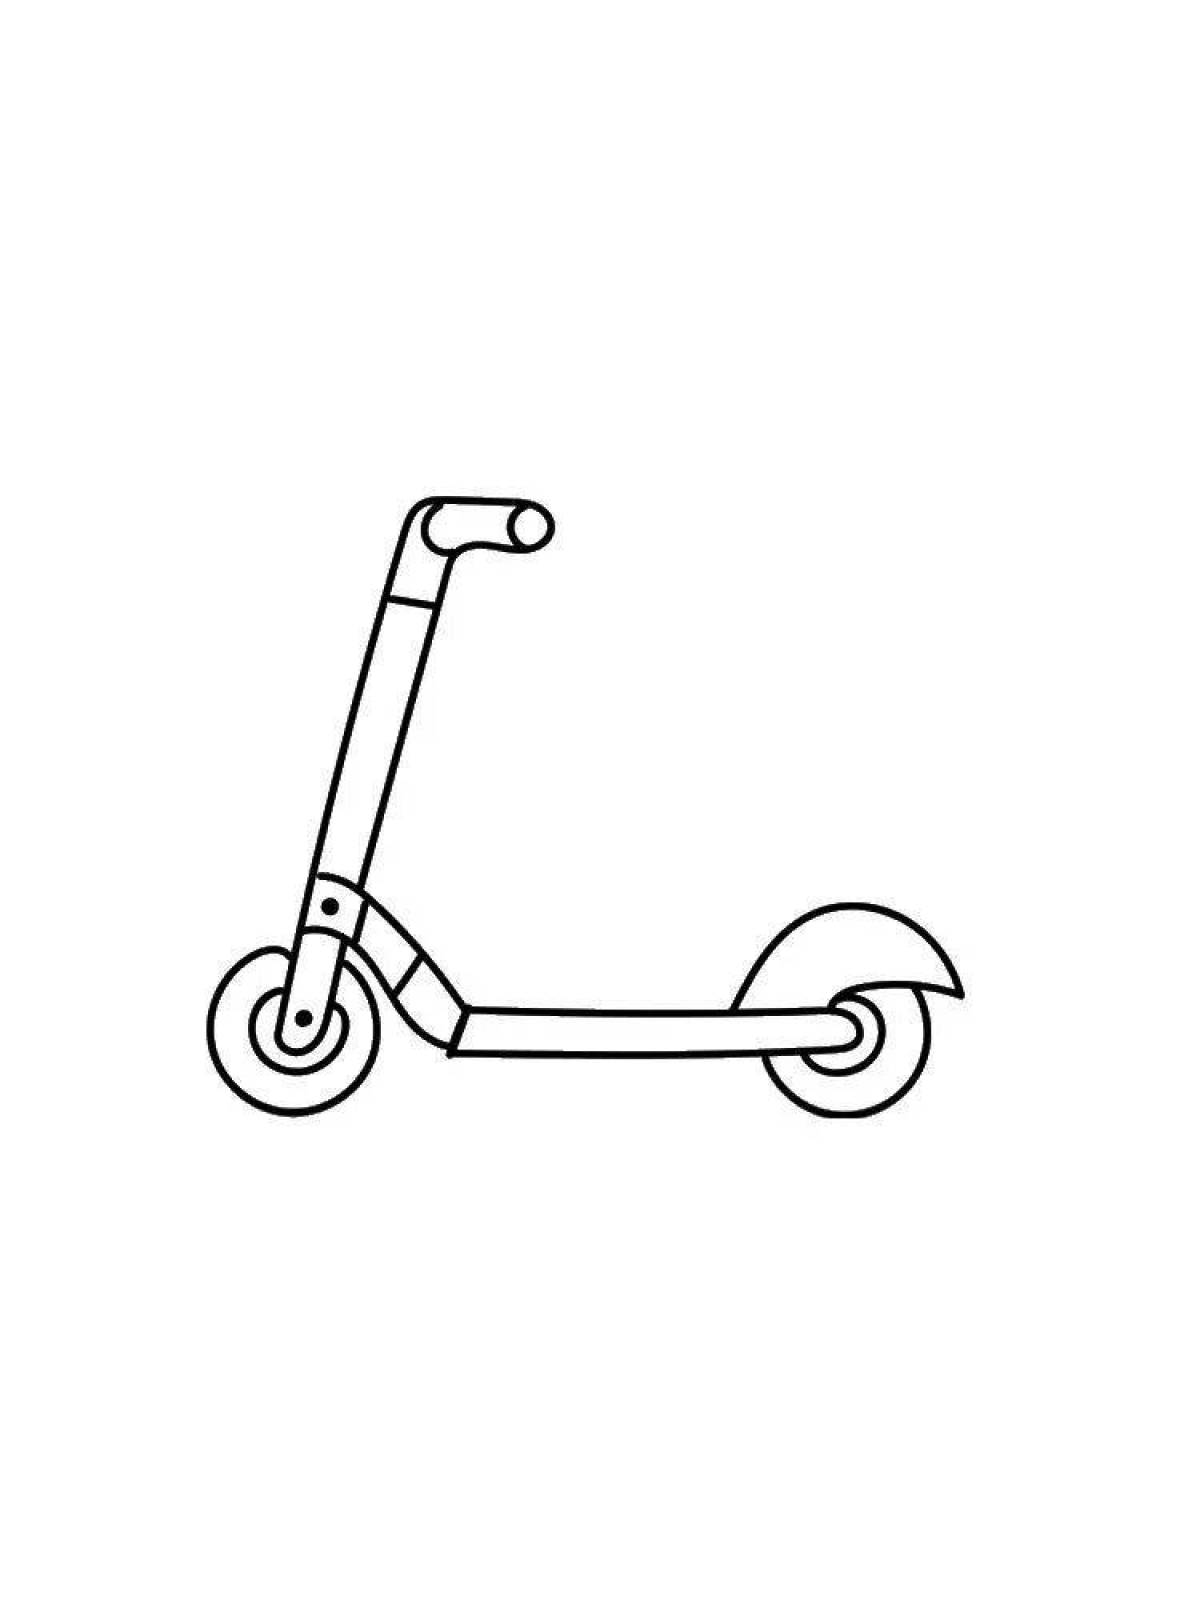 Coloring page powerful stunt scooter